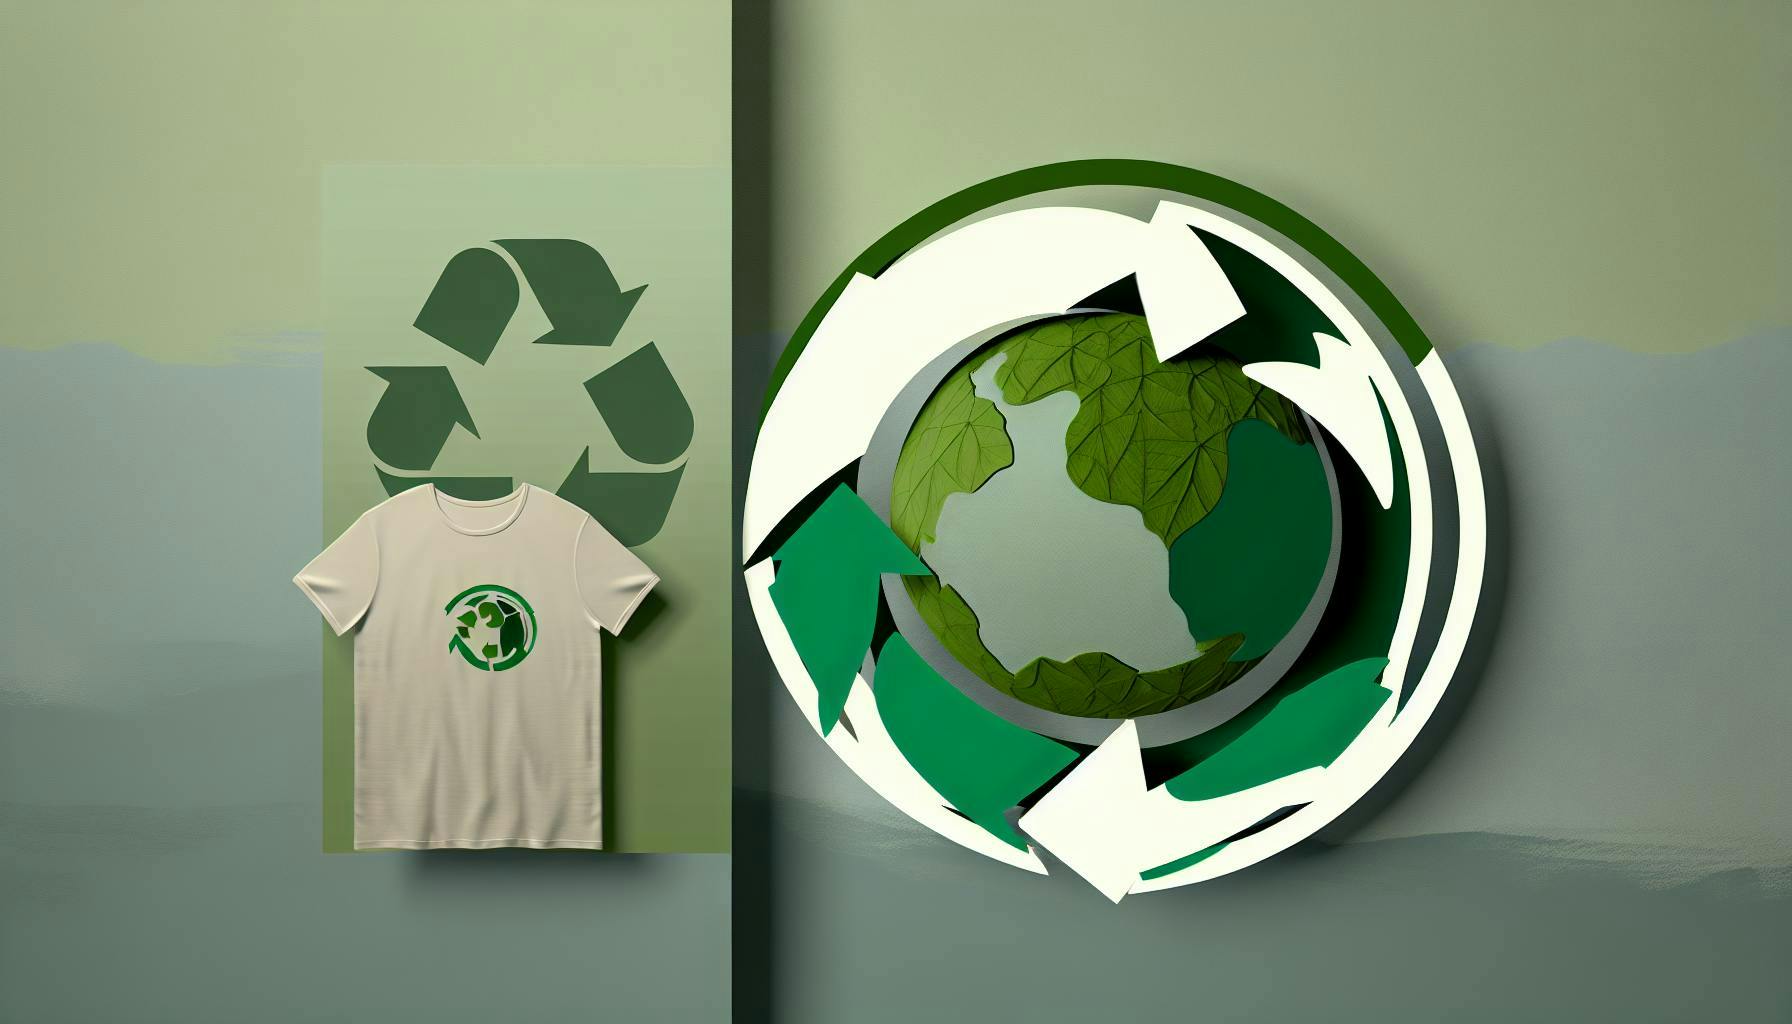 Creating Merch: Sustainable Practices